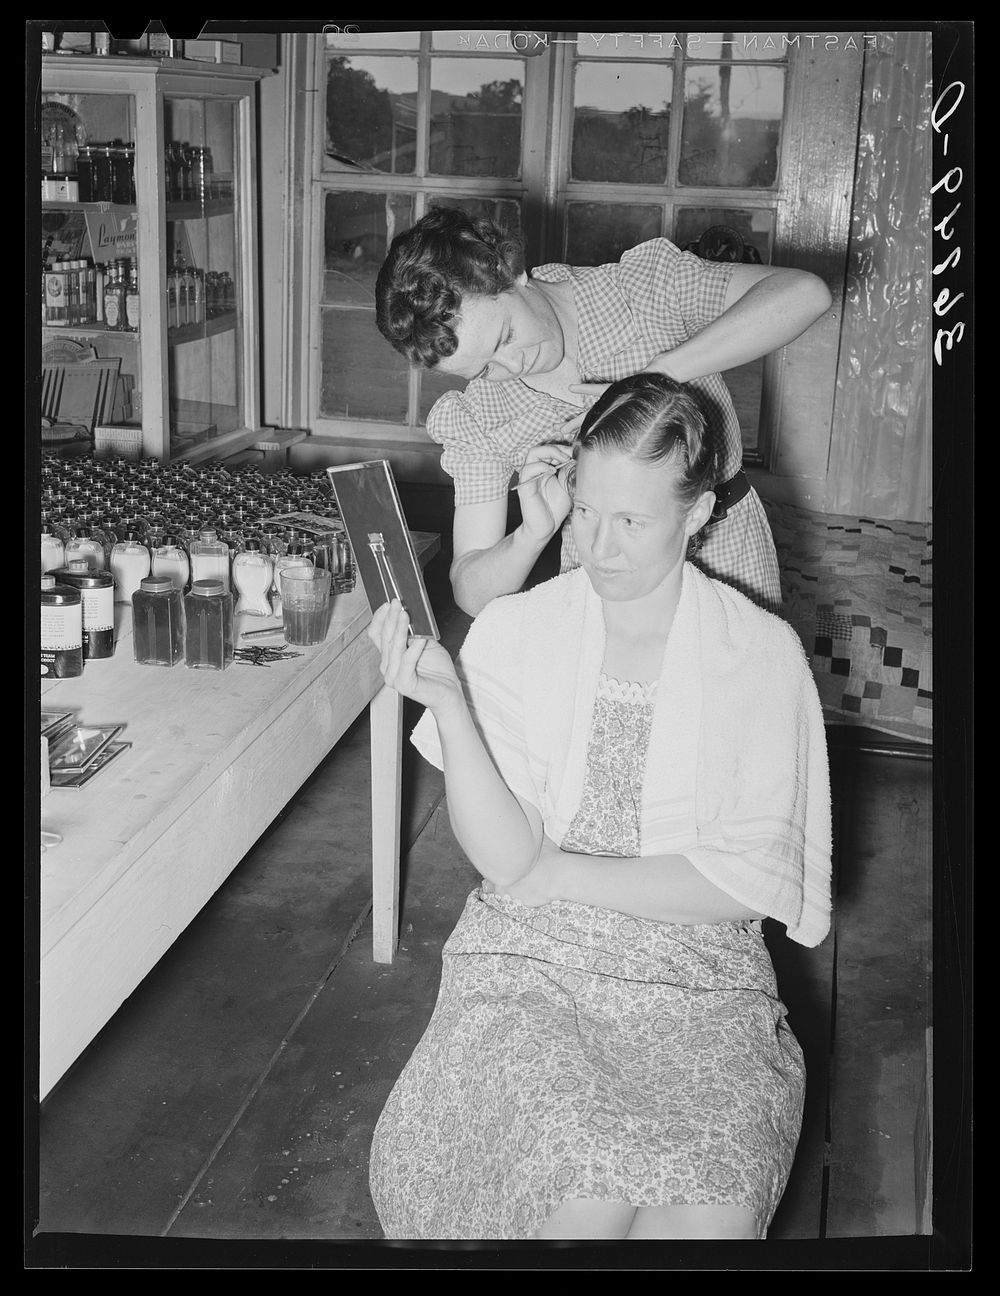 A neighbor fixes the grocery clerk's hair at Pie Town, New Mexico by Russell Lee